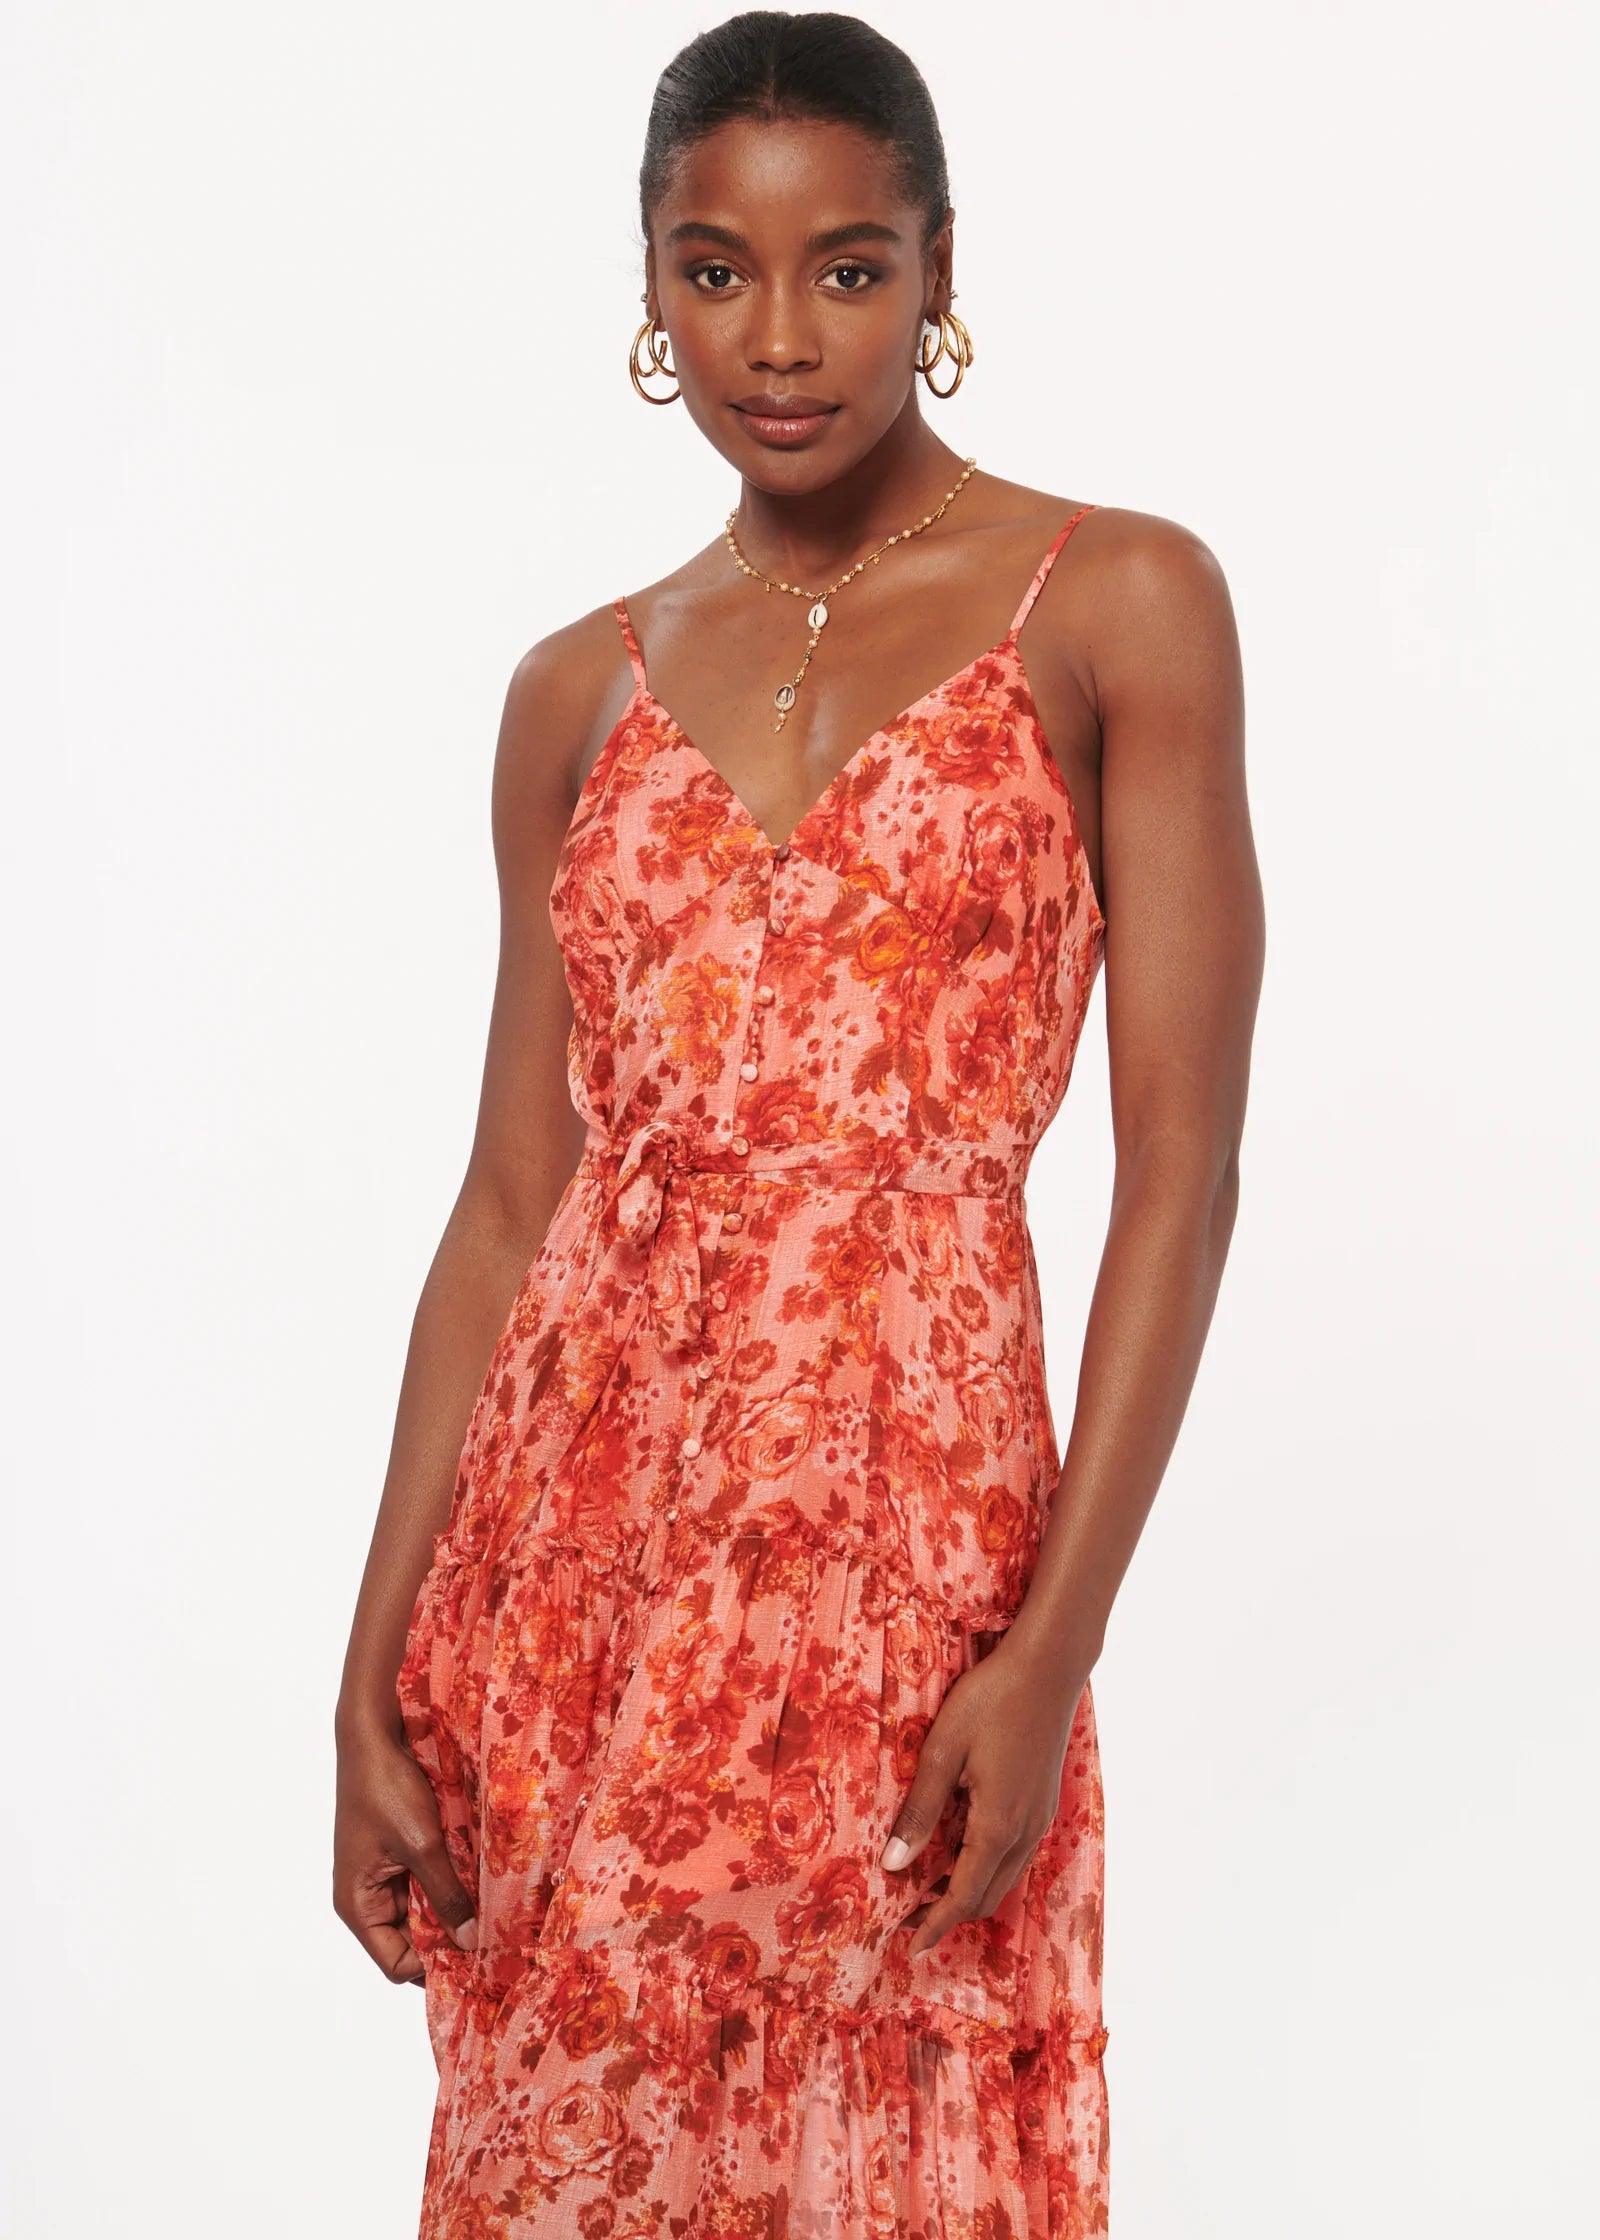 Naria Dress by Cami NYC - Haven